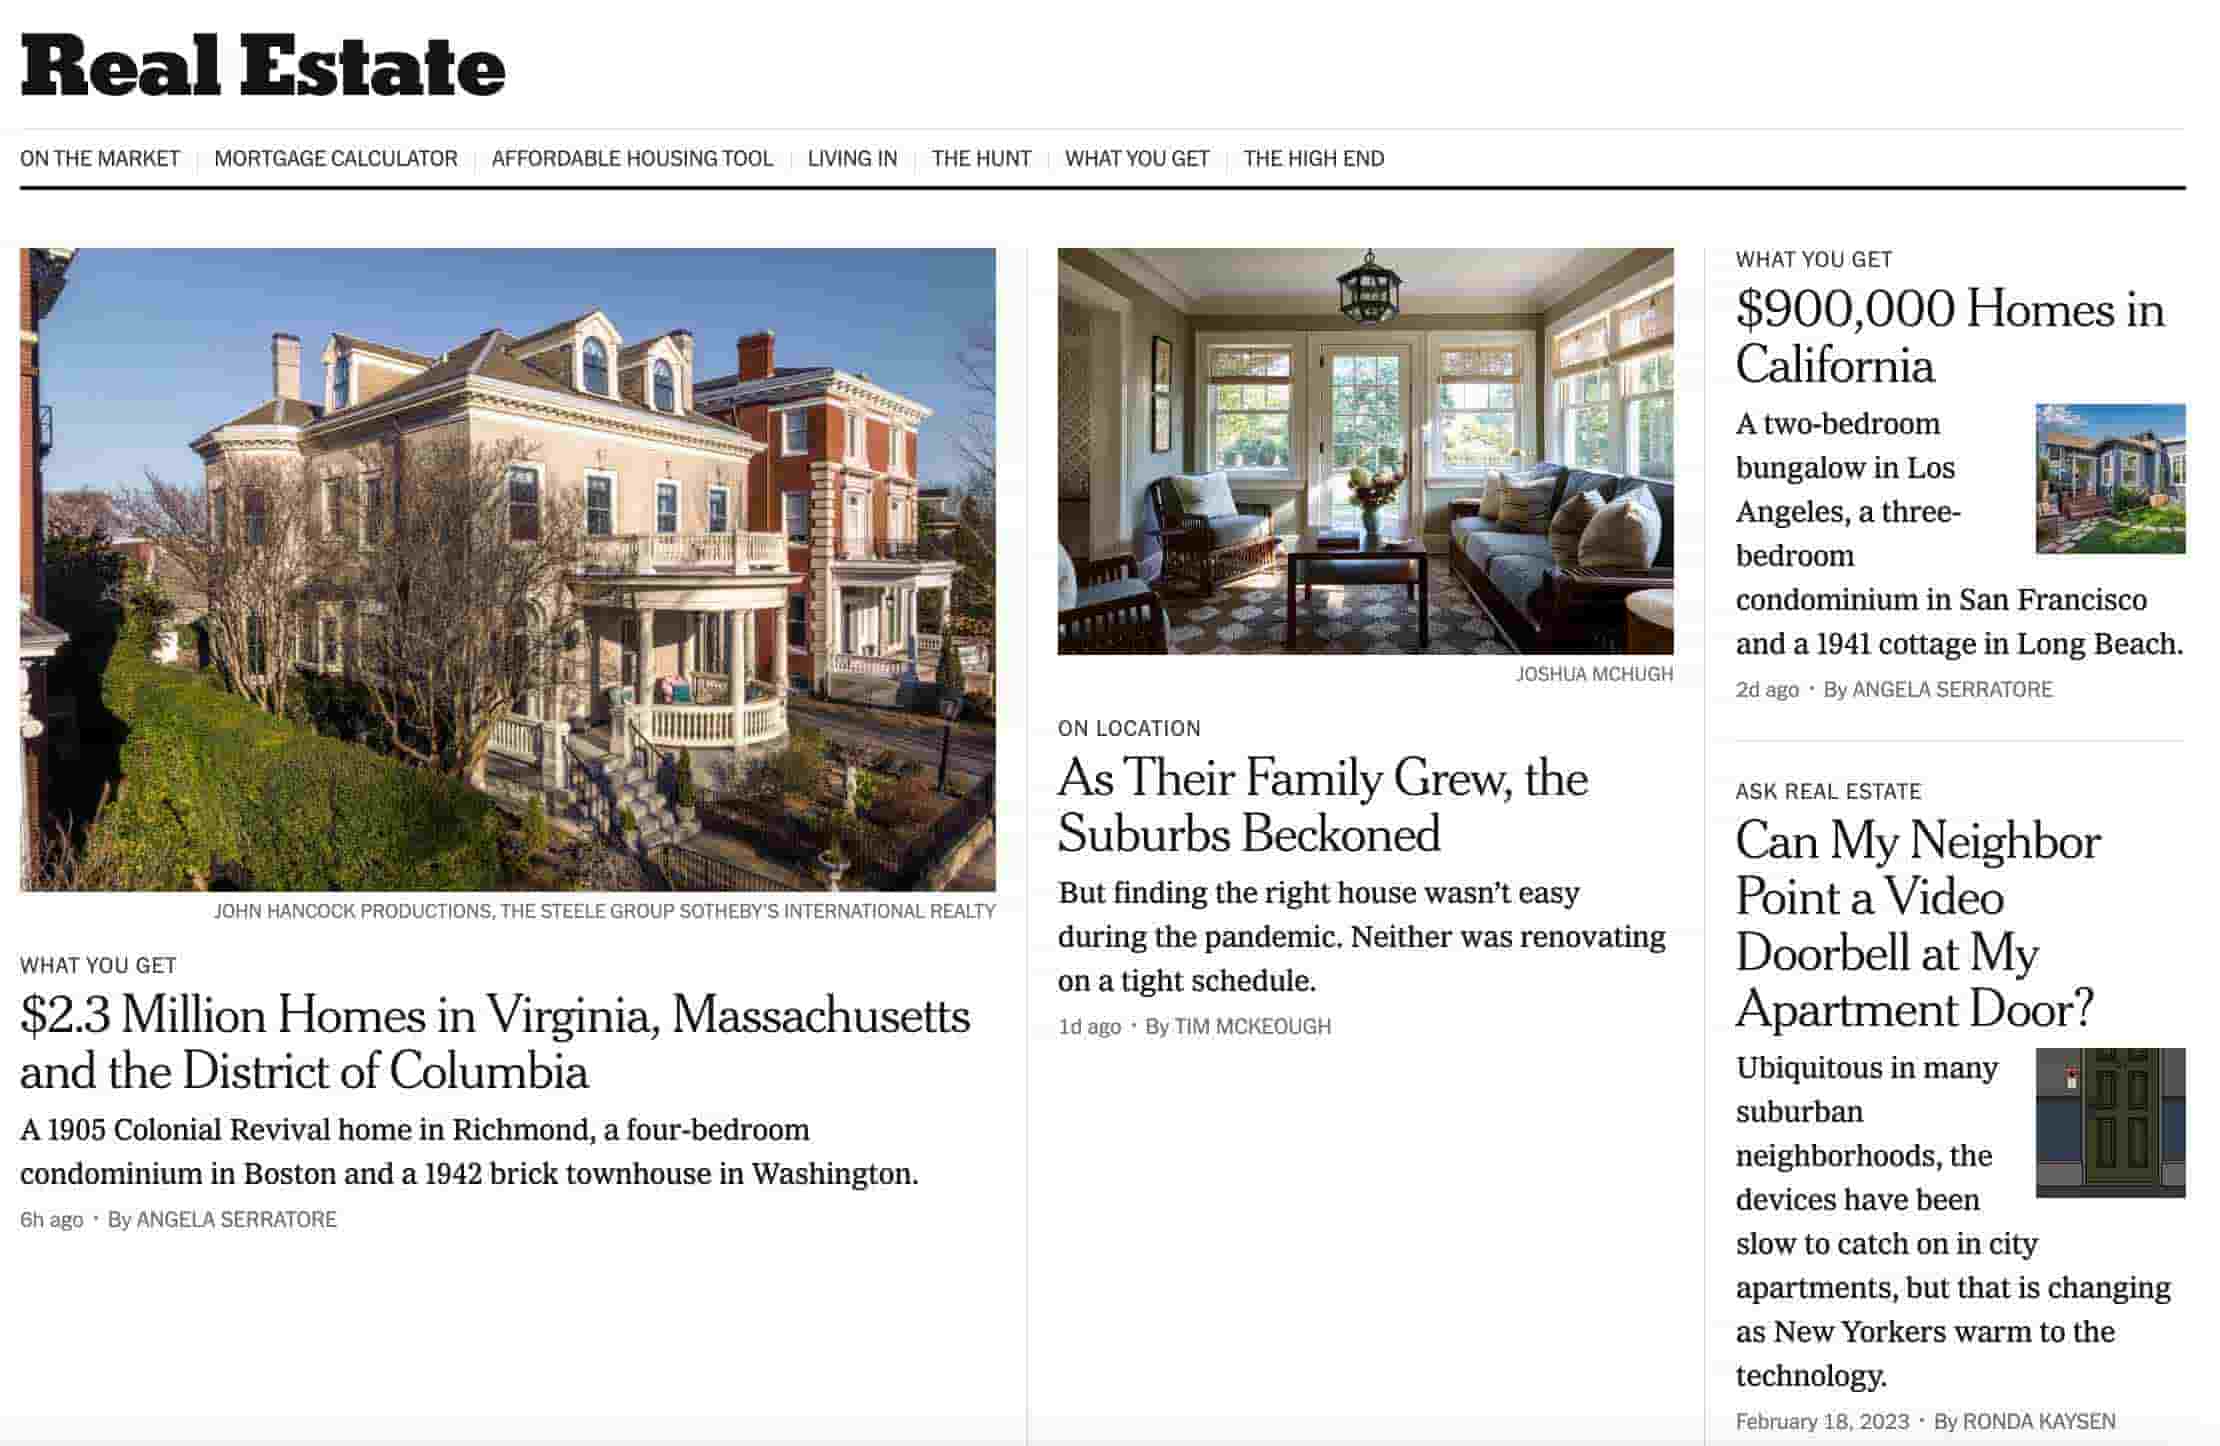 Real estate blog, The New York Times